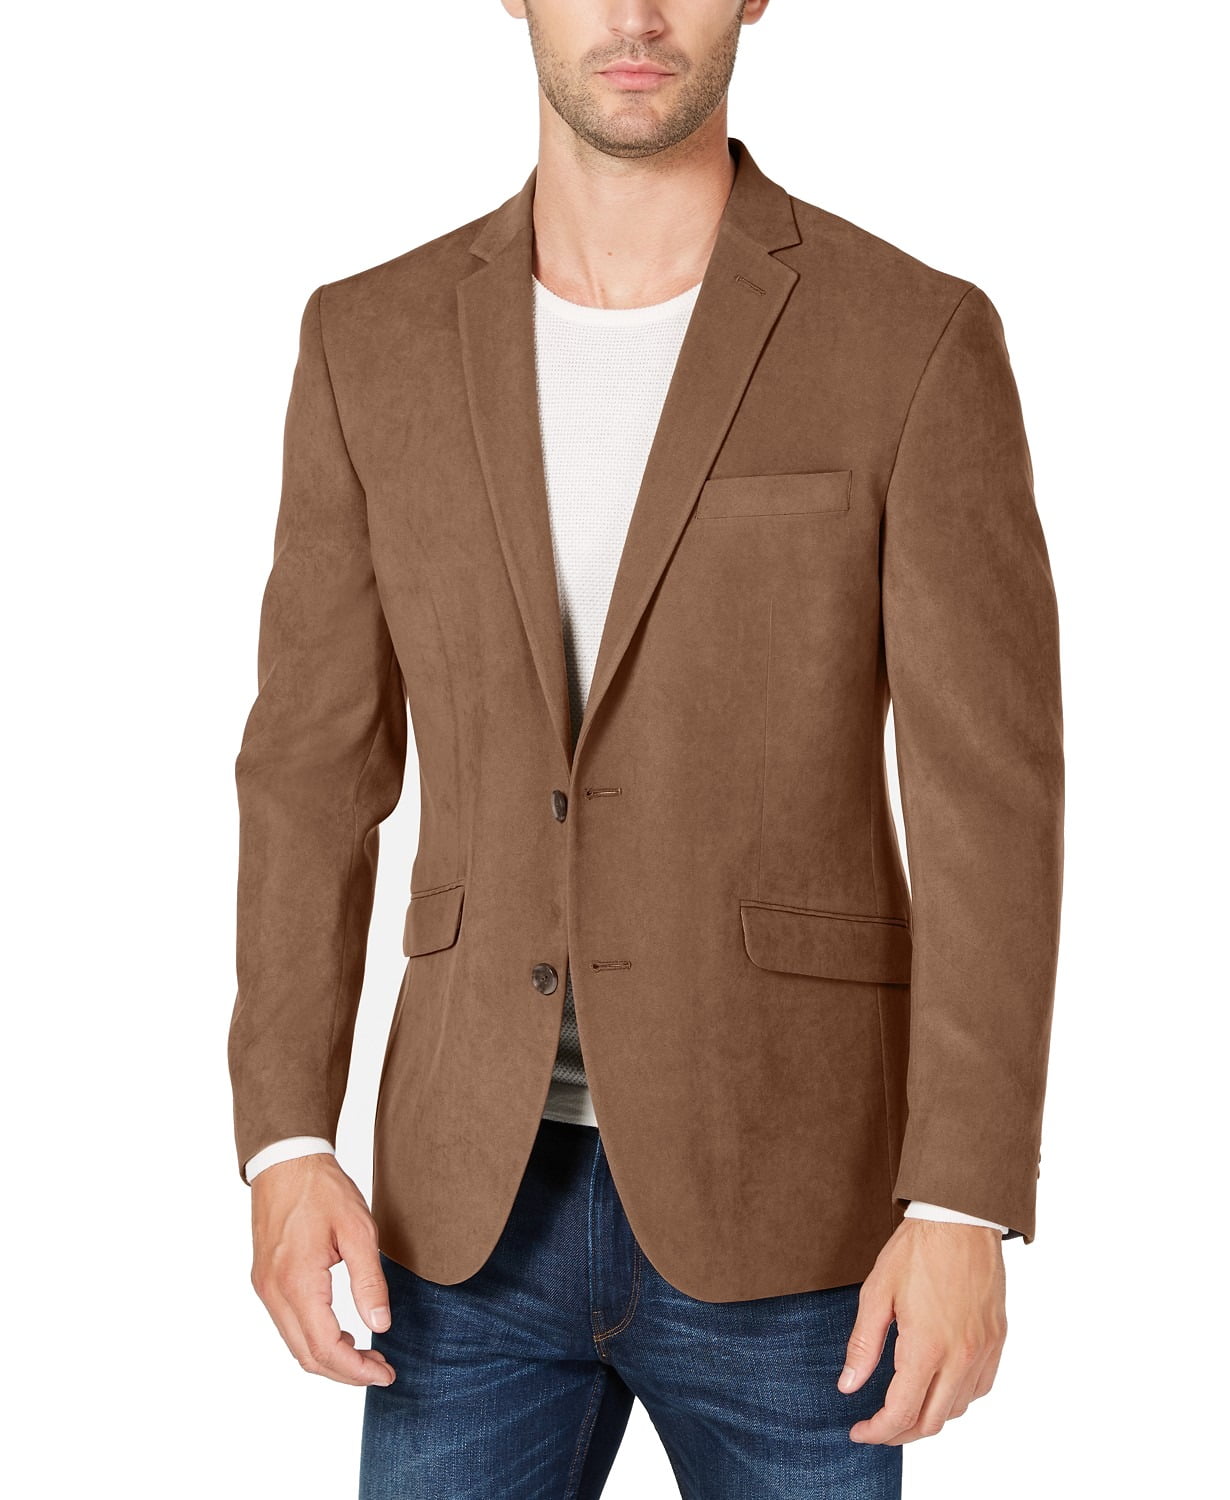 lord and taylor mens sport jackets